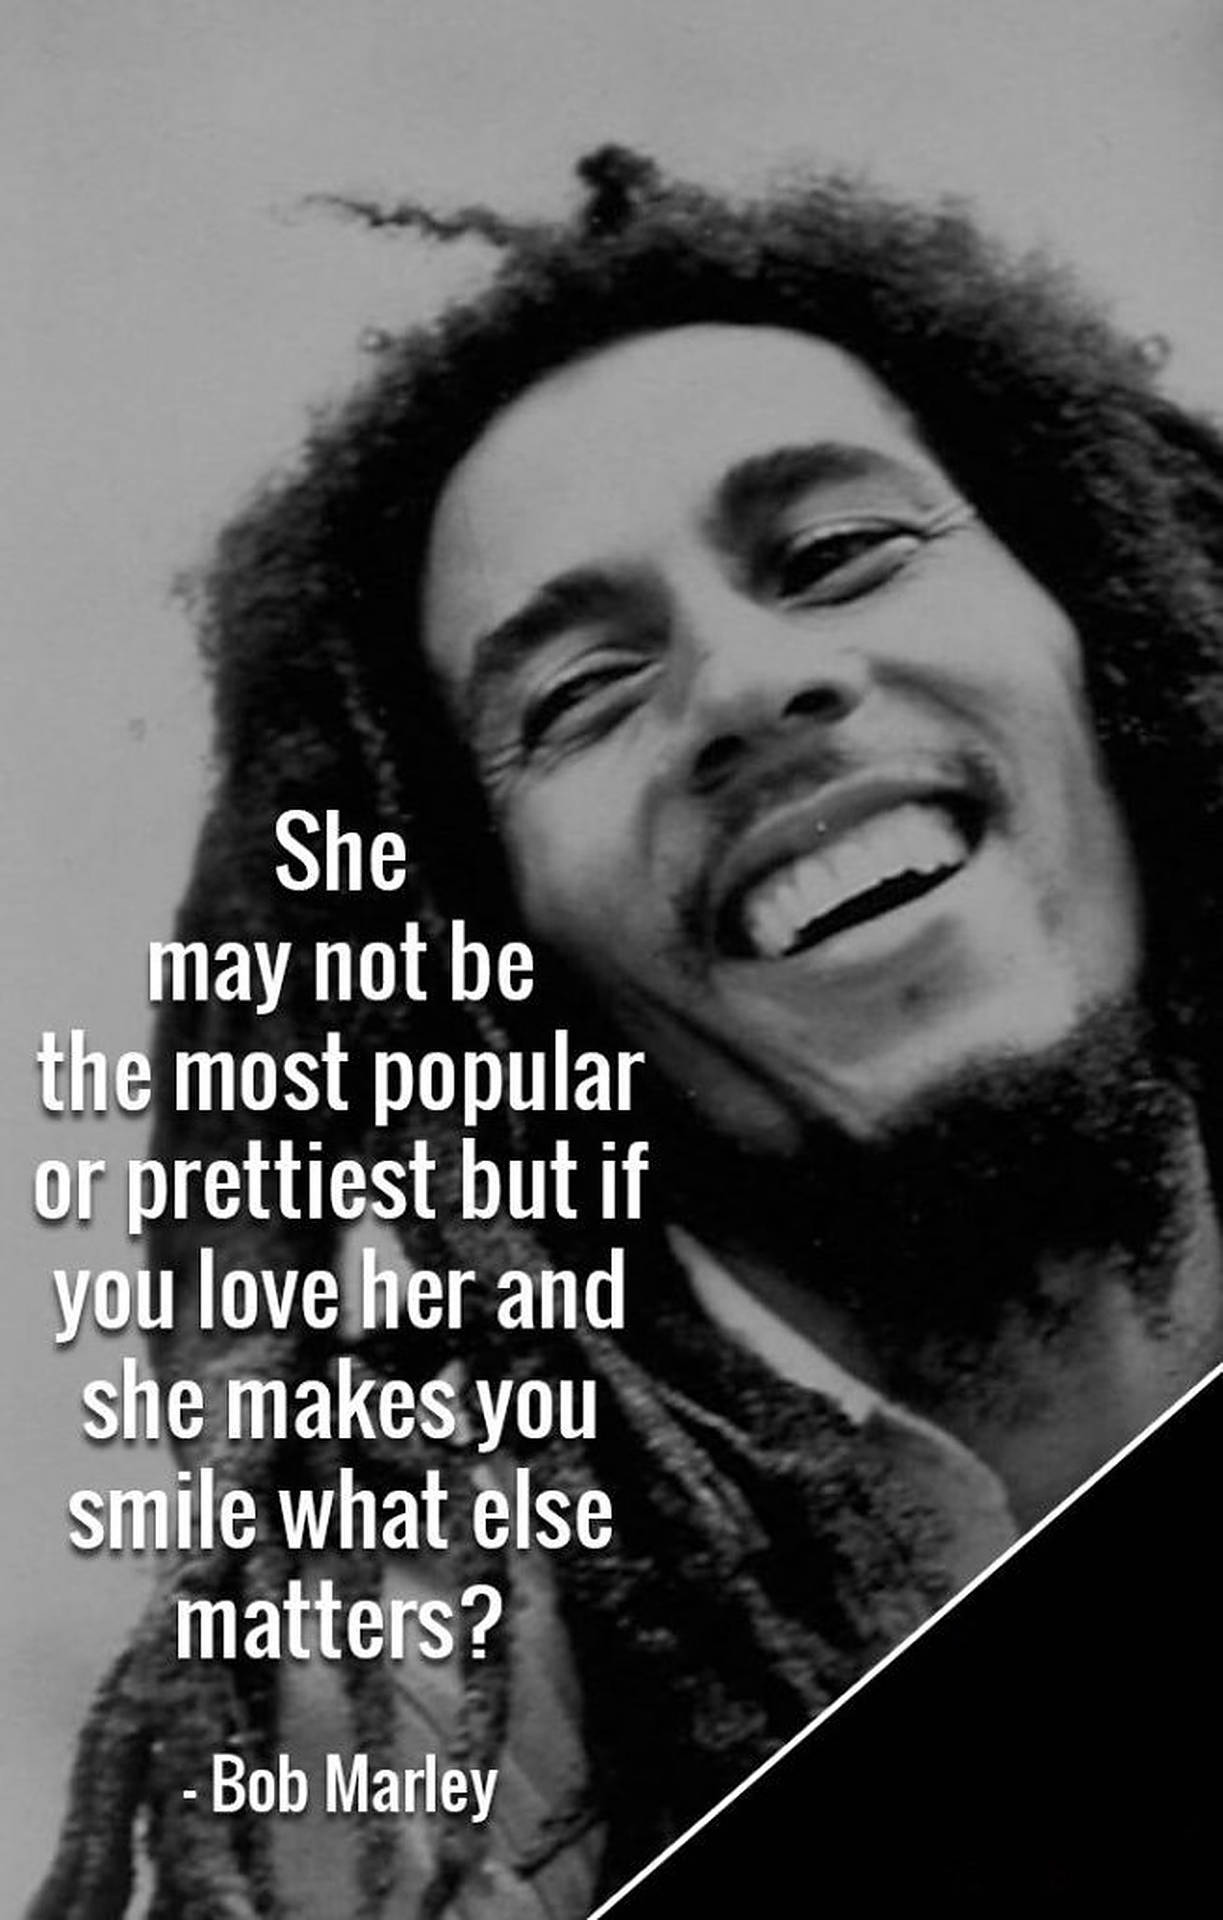 Bob Marley Relationship Quotes Background